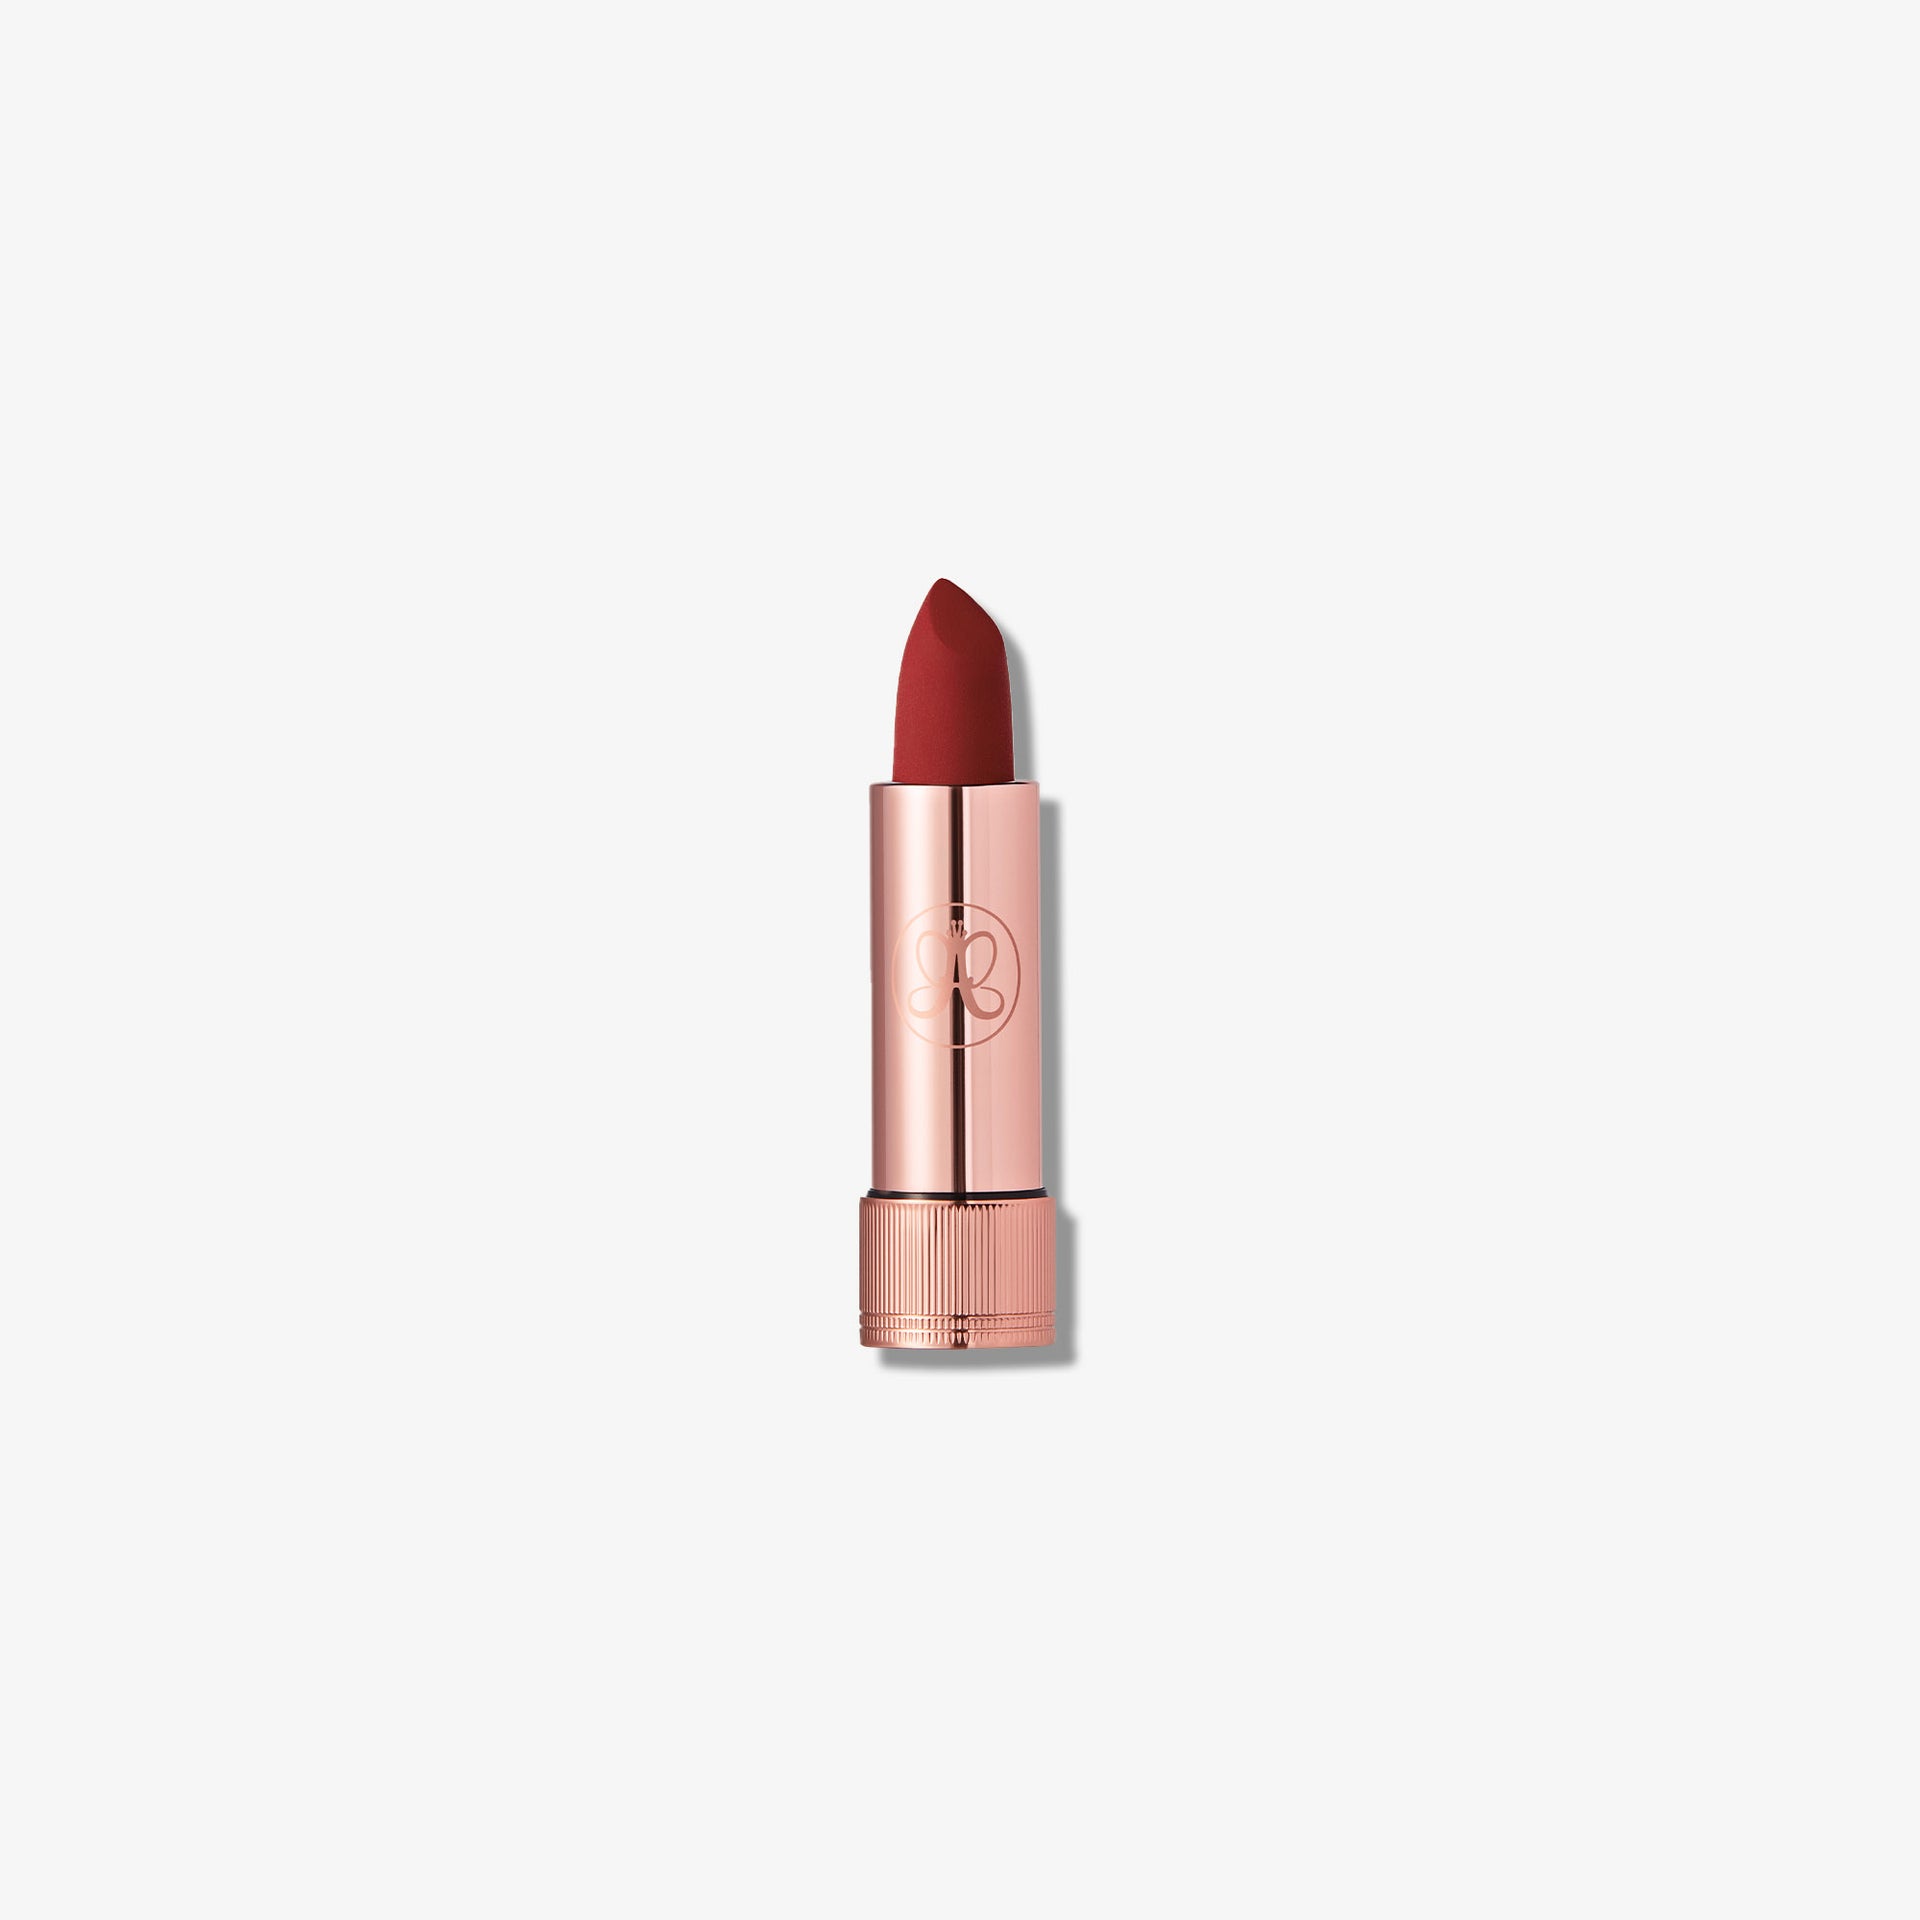 Lychee | Open Limited Edition Satin Lipstick - Lychee